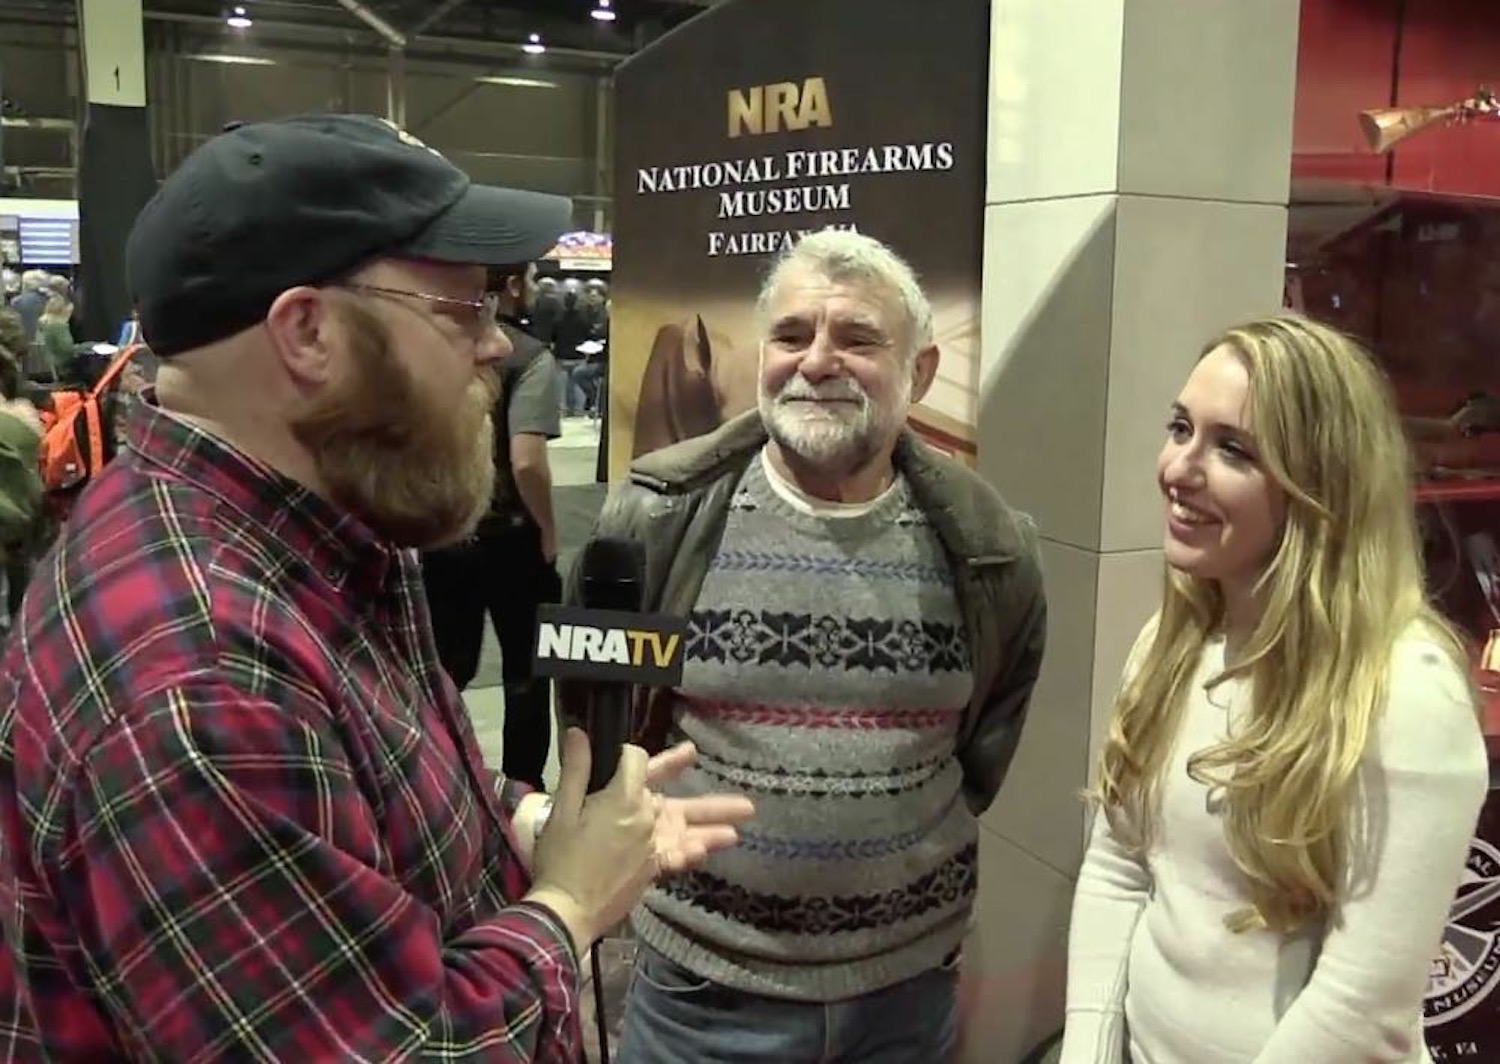 Inspirational: Gabriella Hoffman gives her father’s account of escaping Communism, joining the NRA